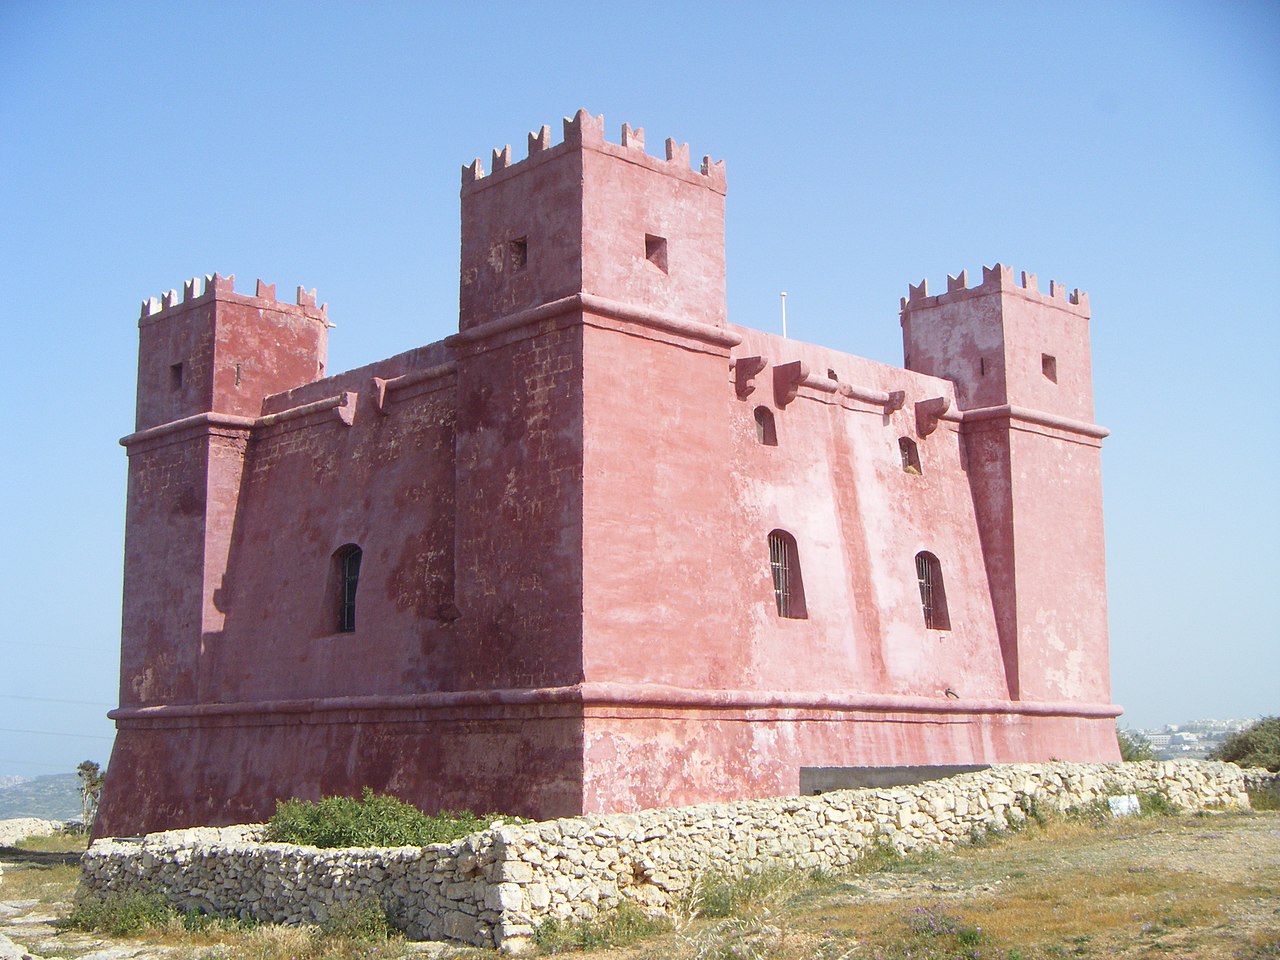 The Red Tower, Malta